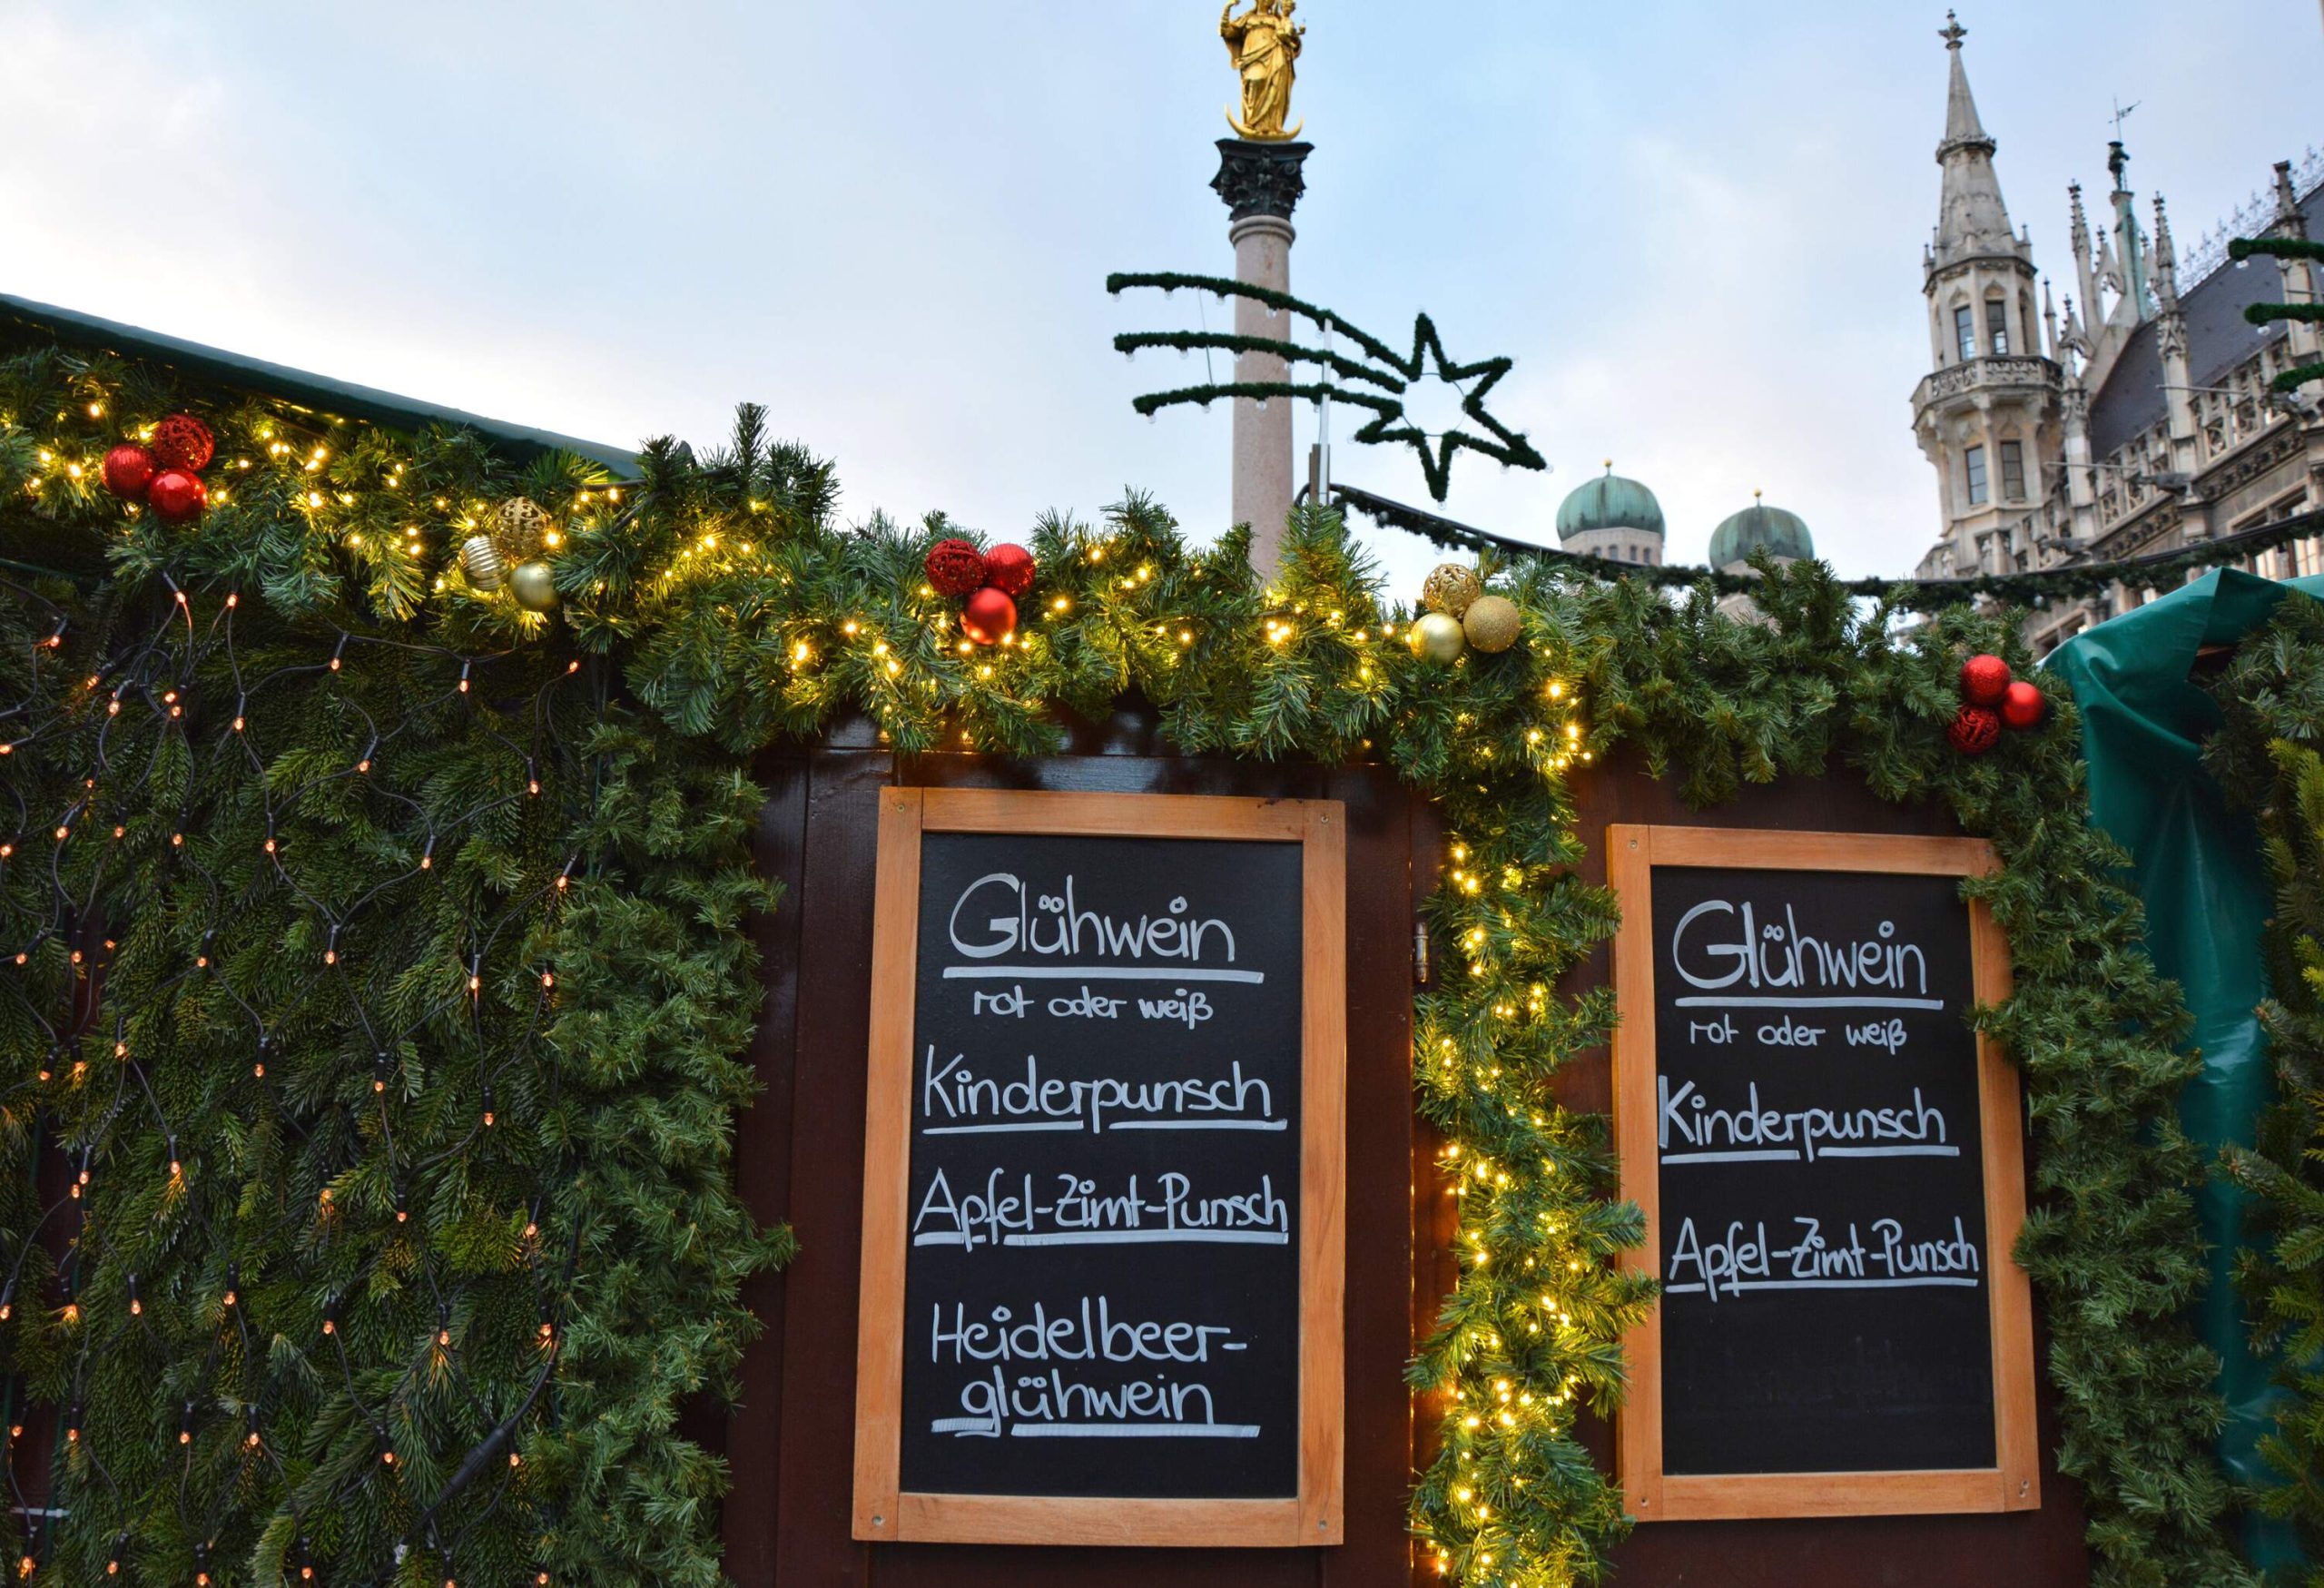 A handwritten drinks menu in German language, written on the menu board on the wall decorated with Christmas ornaments.